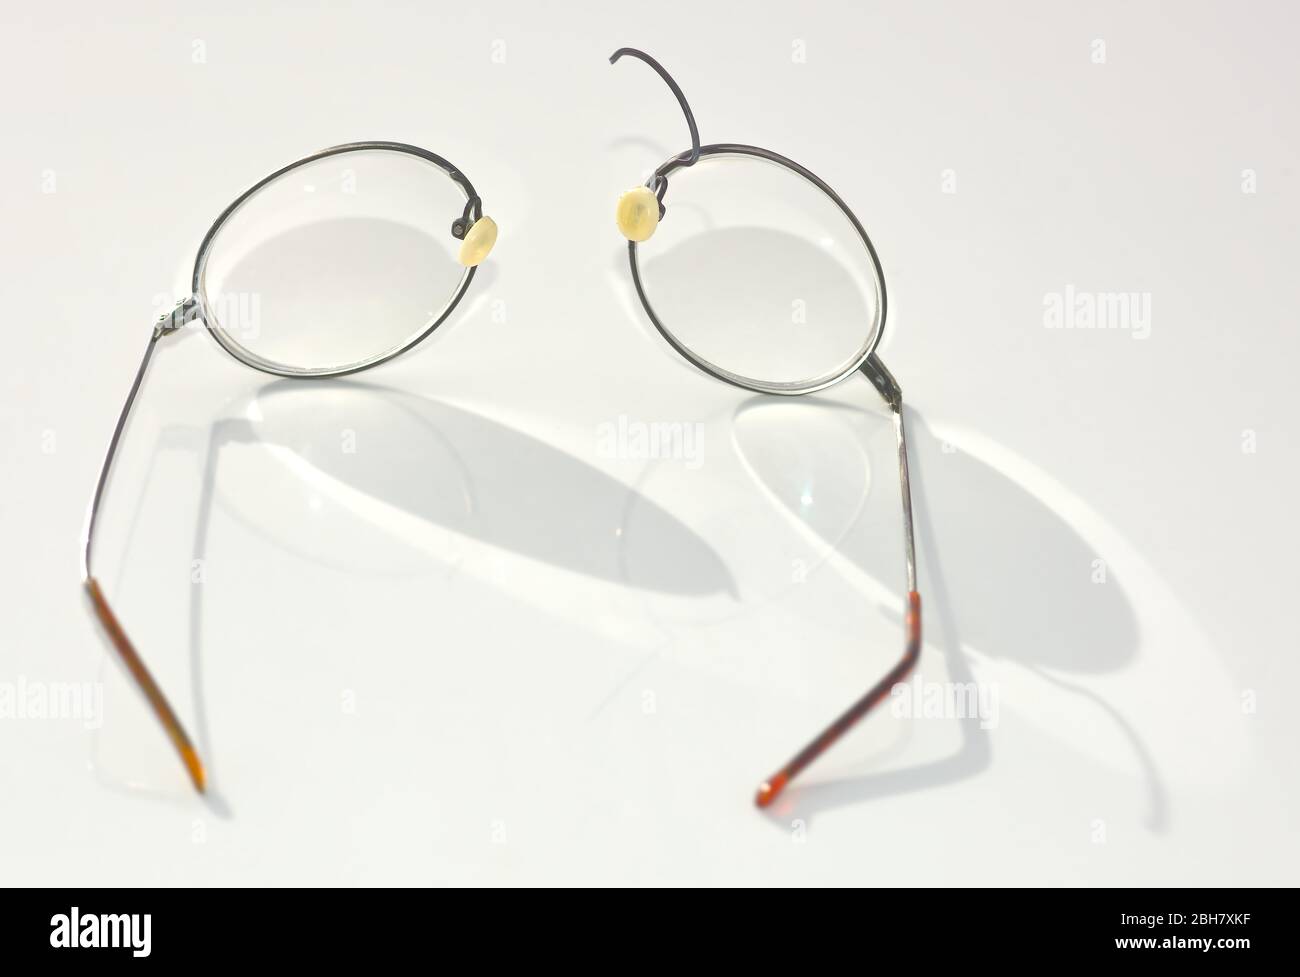 A pair of Titanium Wire Rim eye glasses that have broken and split apart on the nose bridge section. Stock Photo